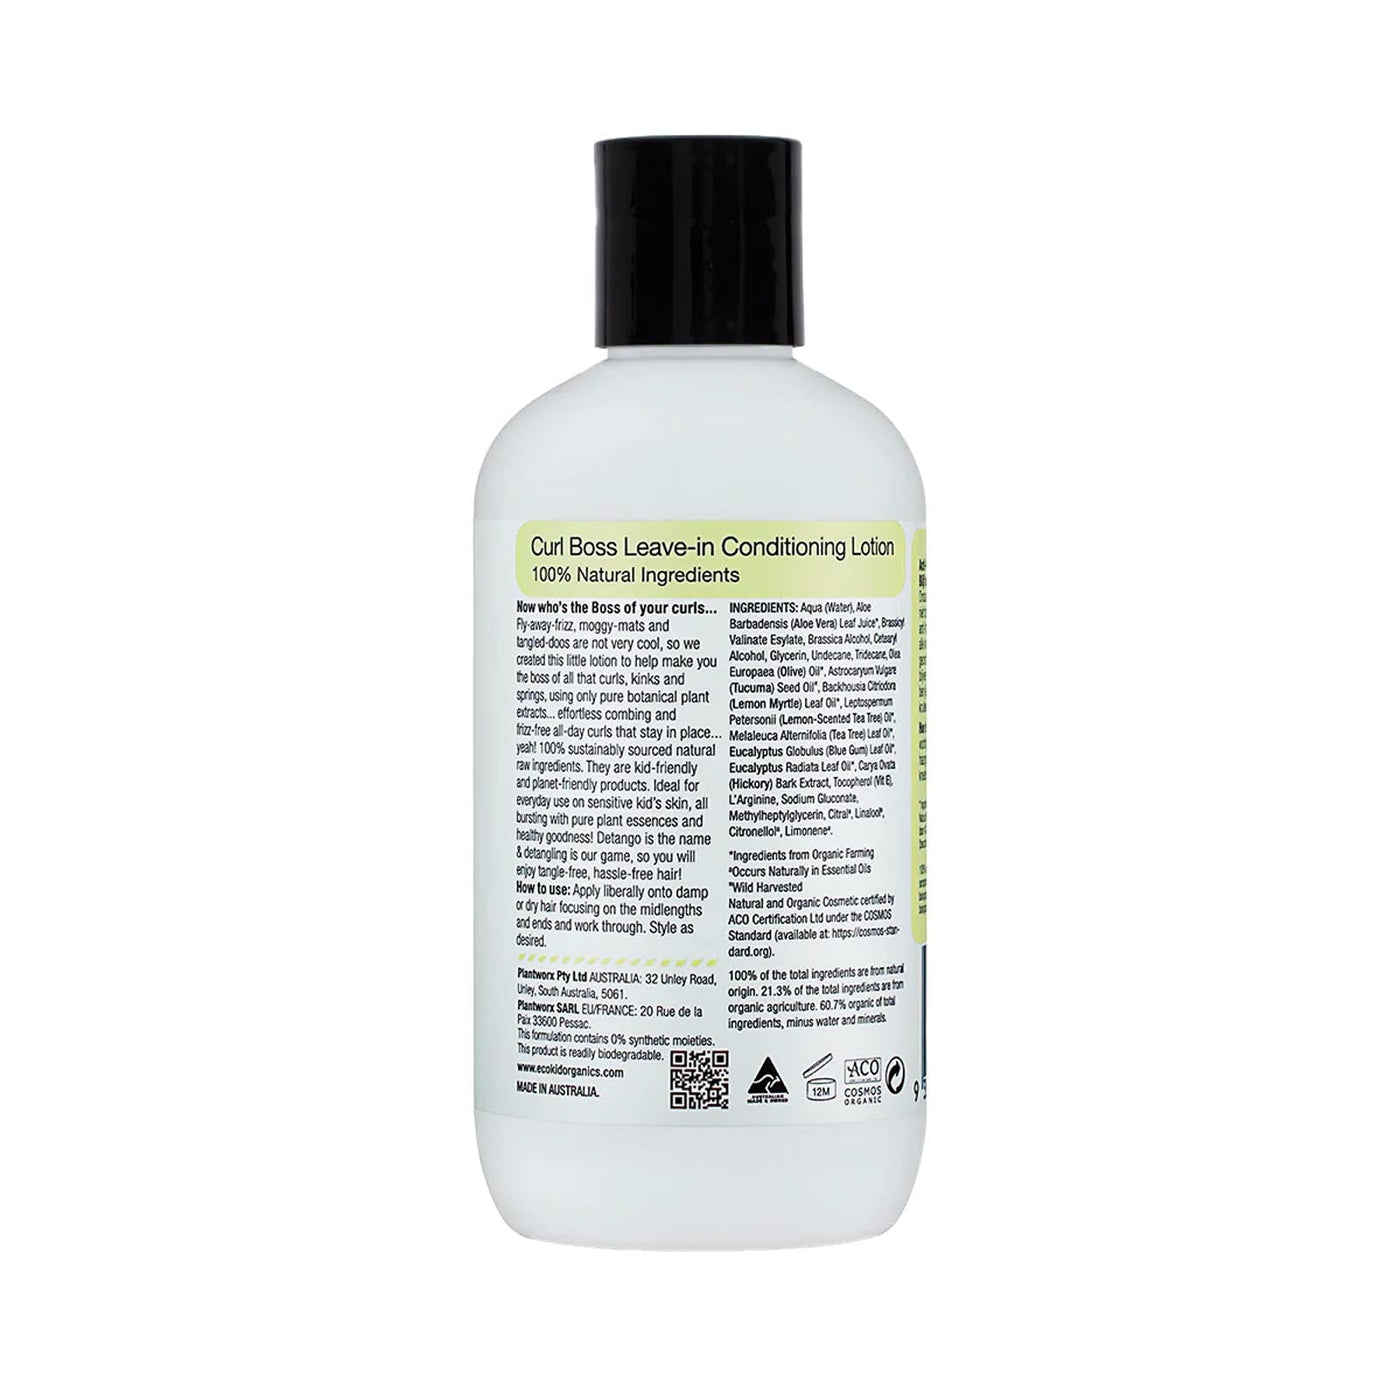 Eco.kid Nourish Curl Boss Leave-In Conditioner Lotion (225ml) back